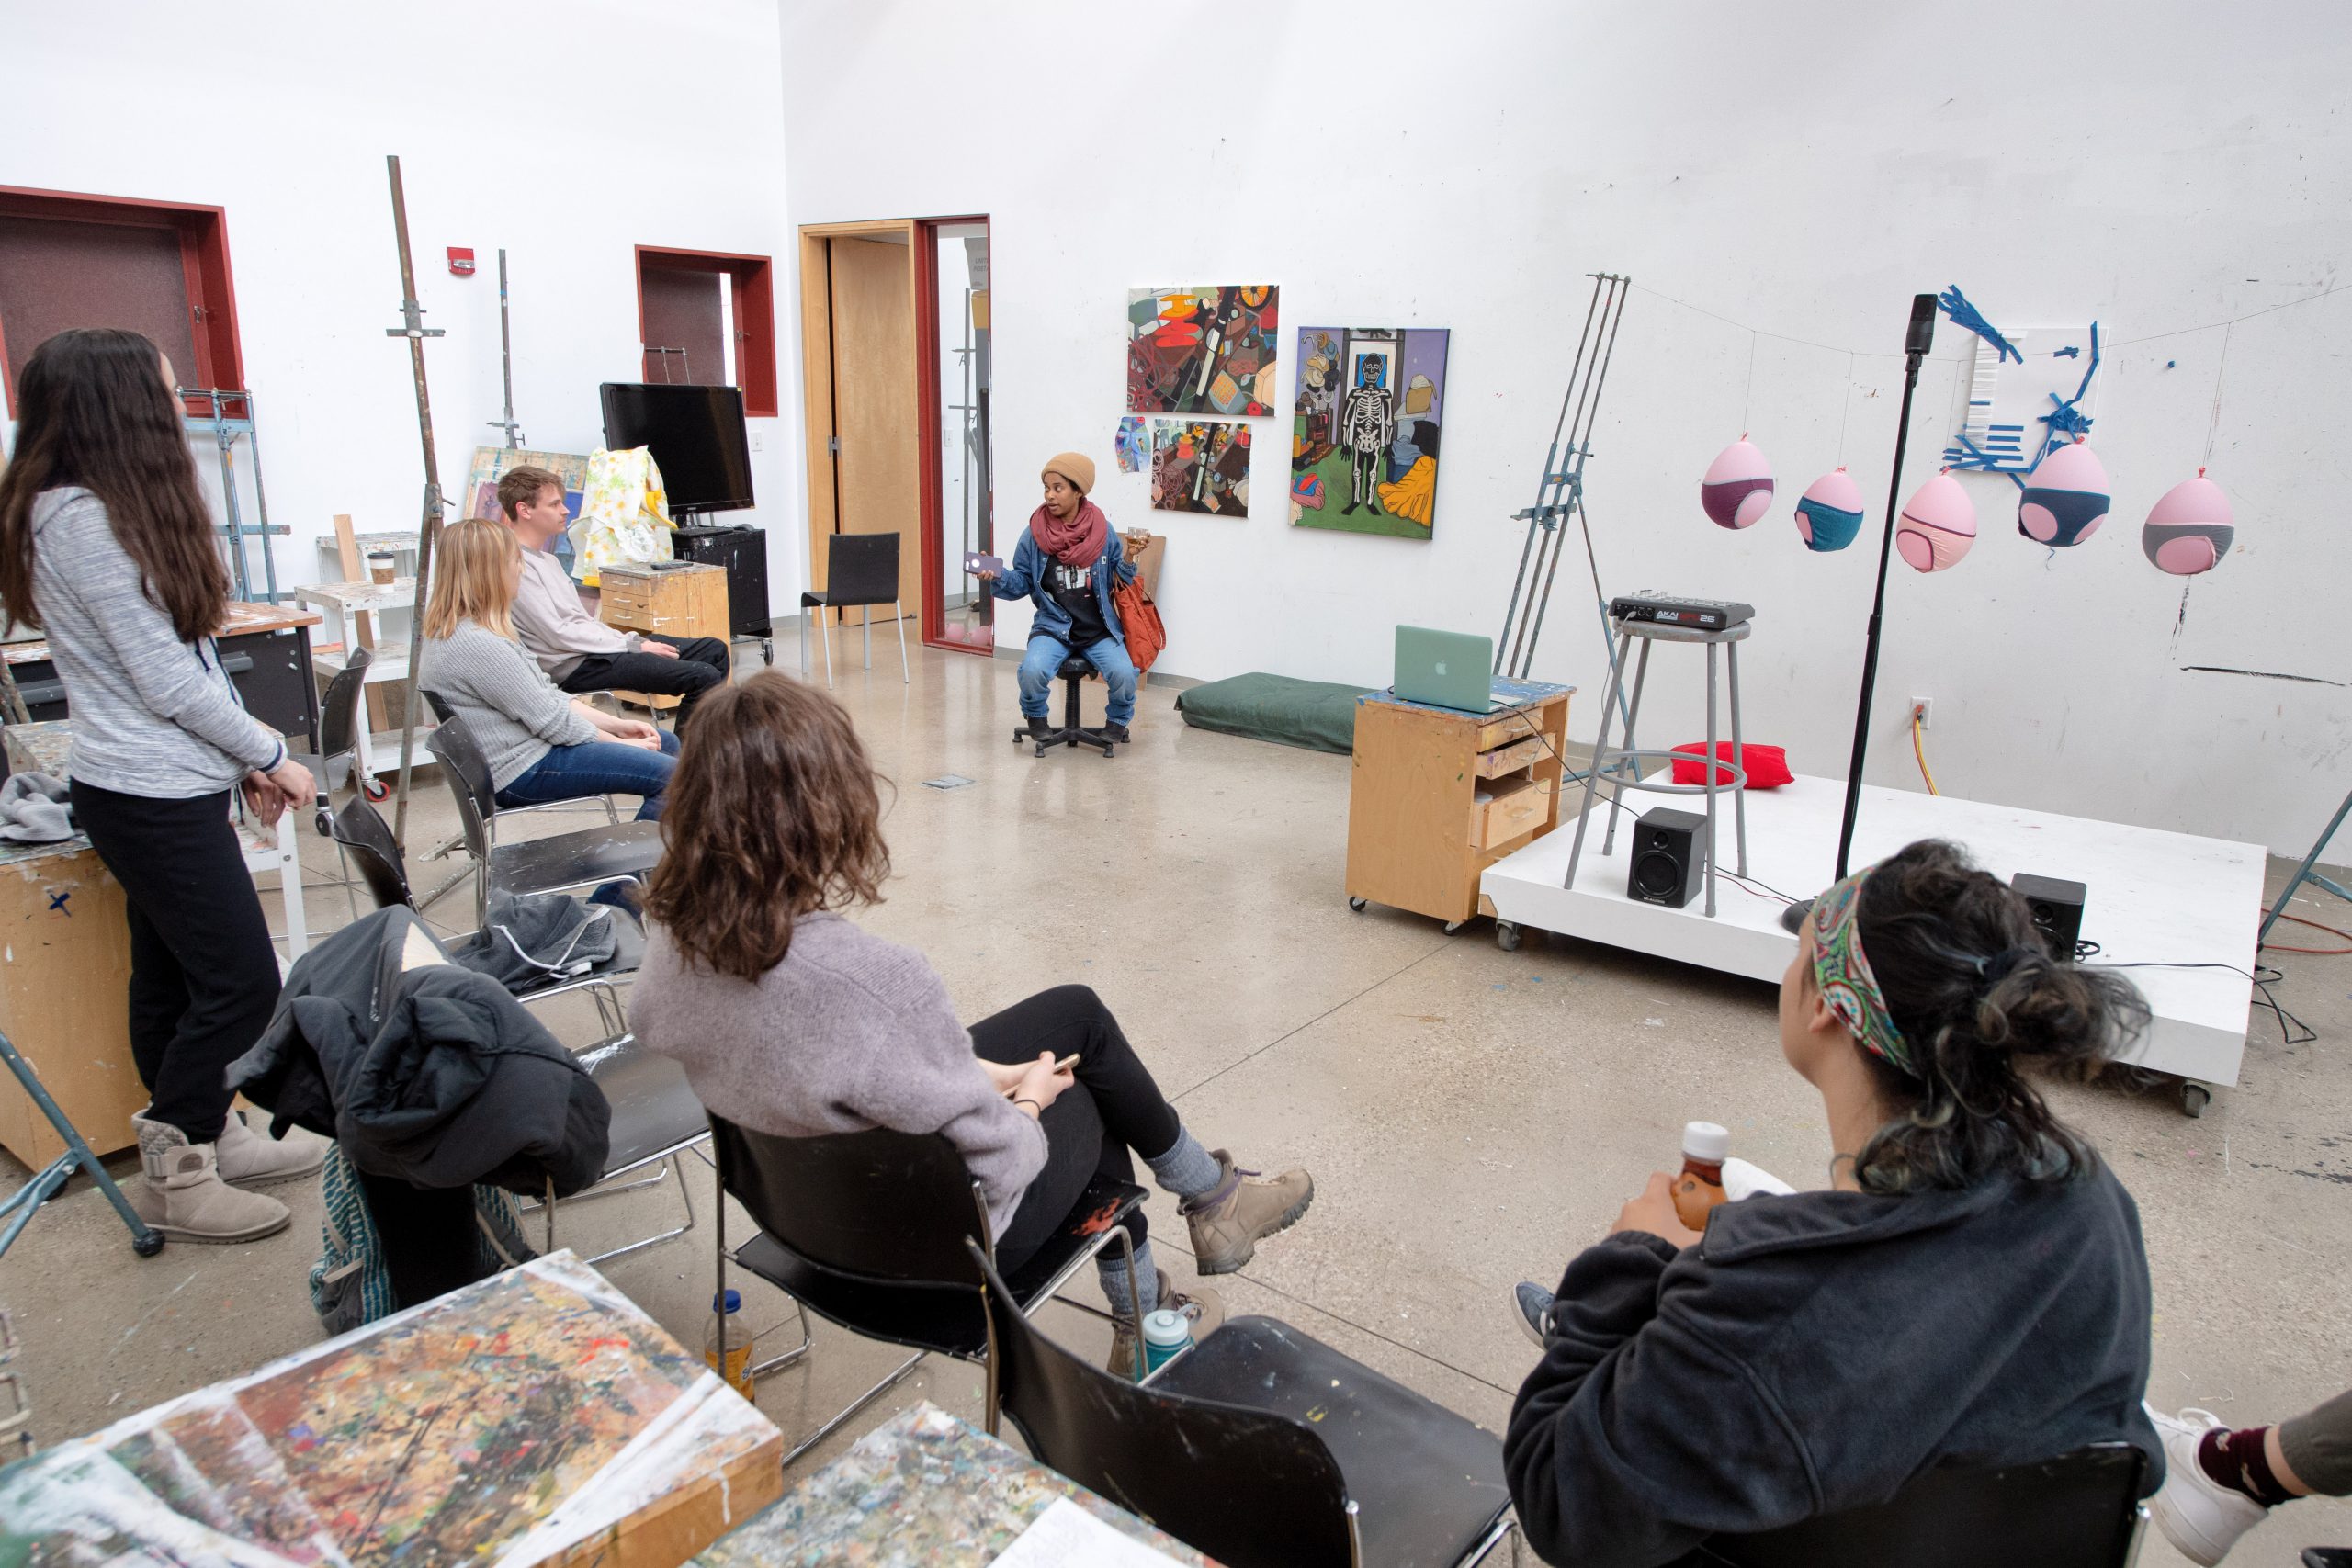 Students in a painting studio in Art Building West.